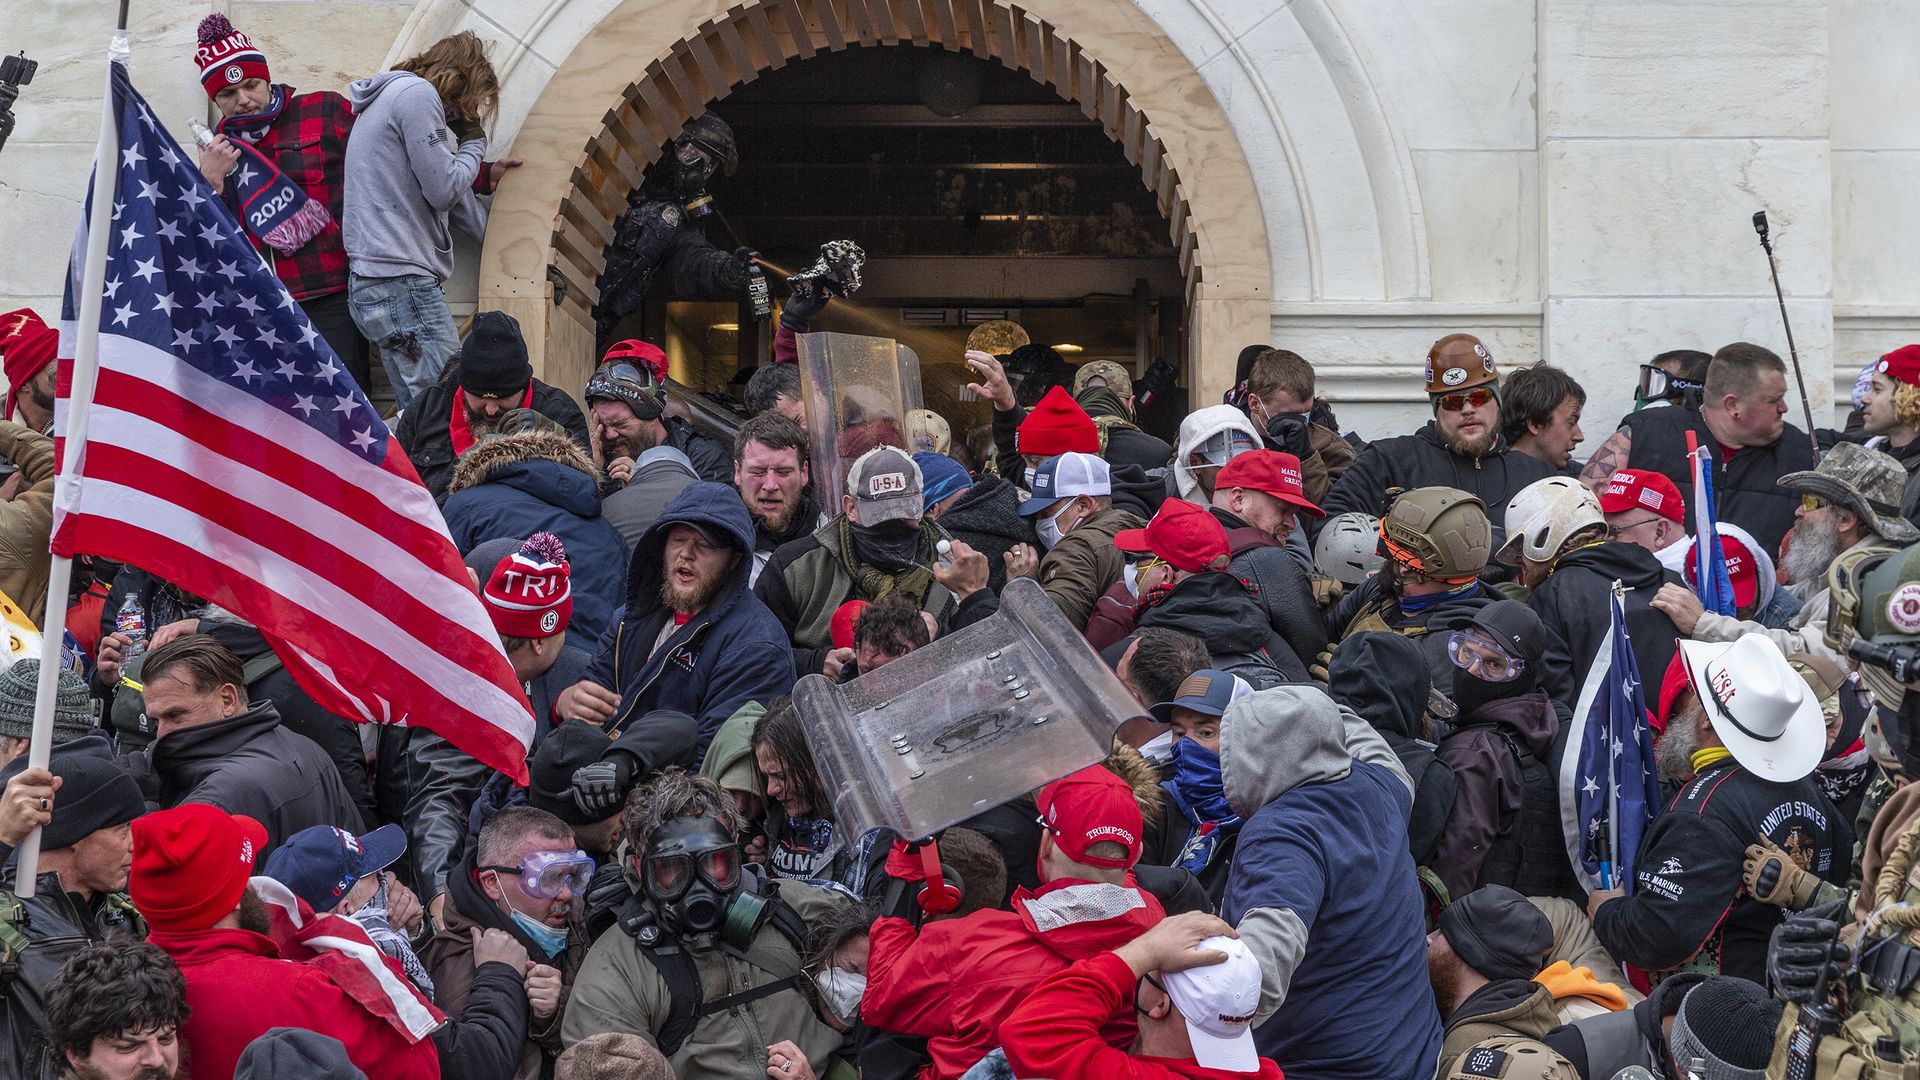 The pro-Trump mob rioting at the Capitol on Jan 6.